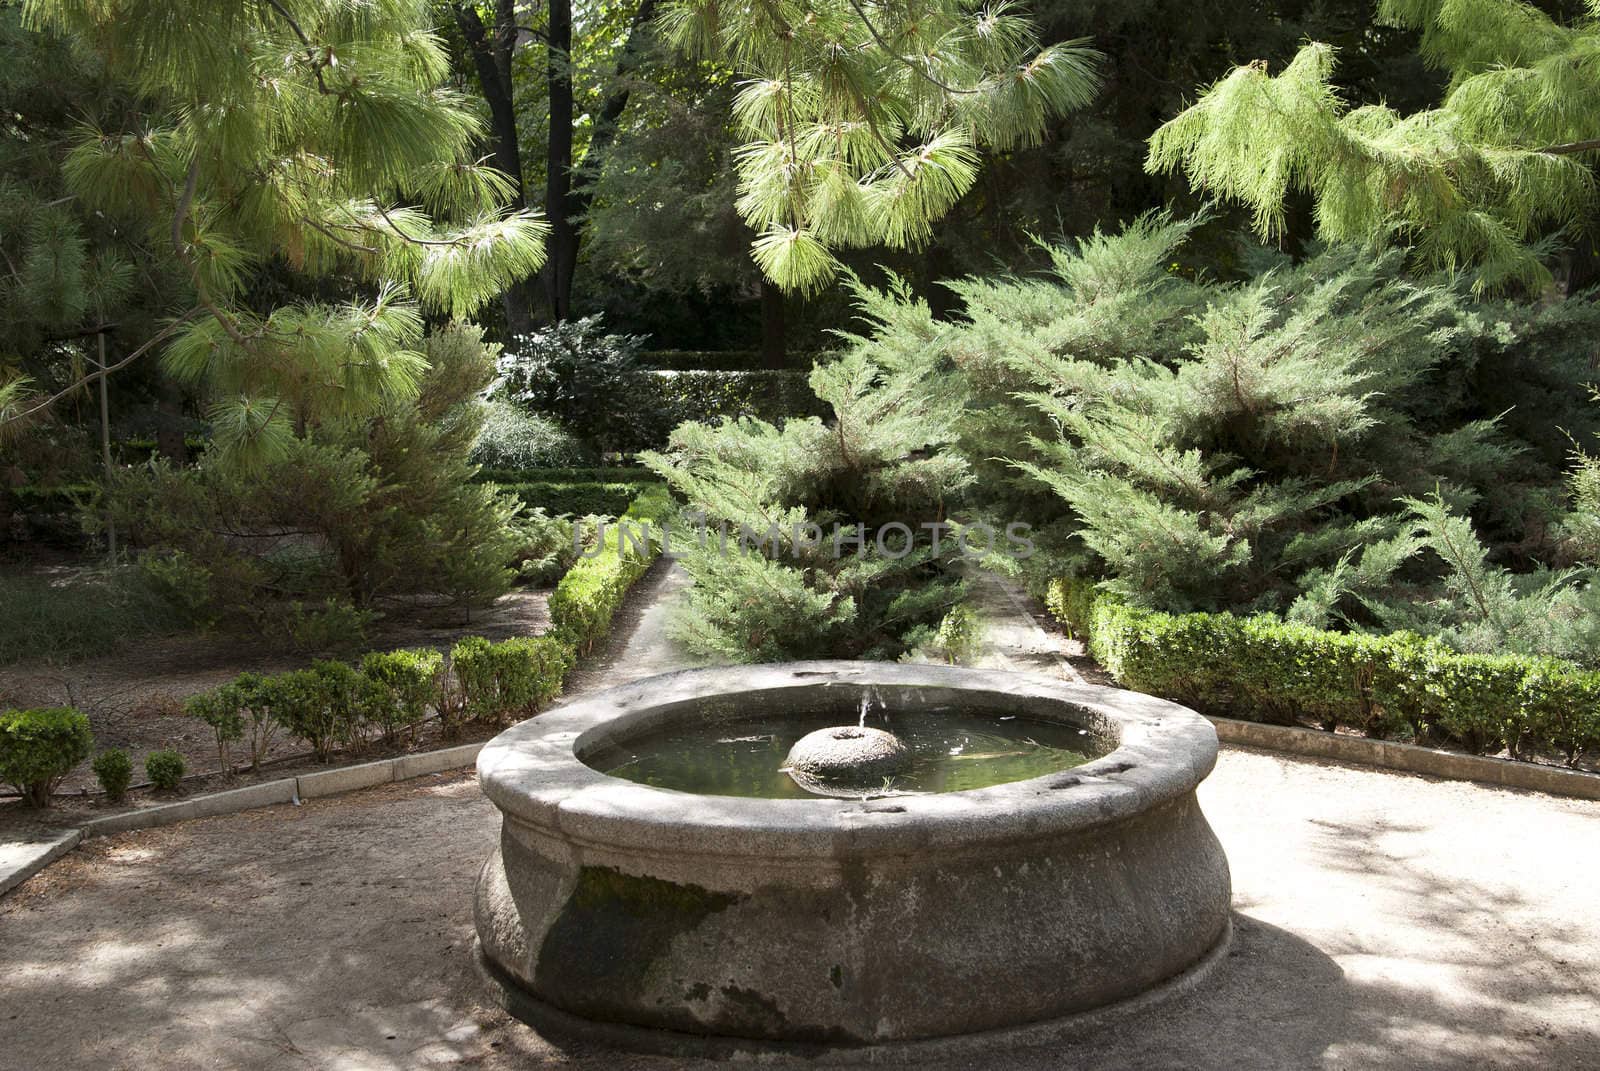 antique old fountain in the garden among fir trees by Larisa13